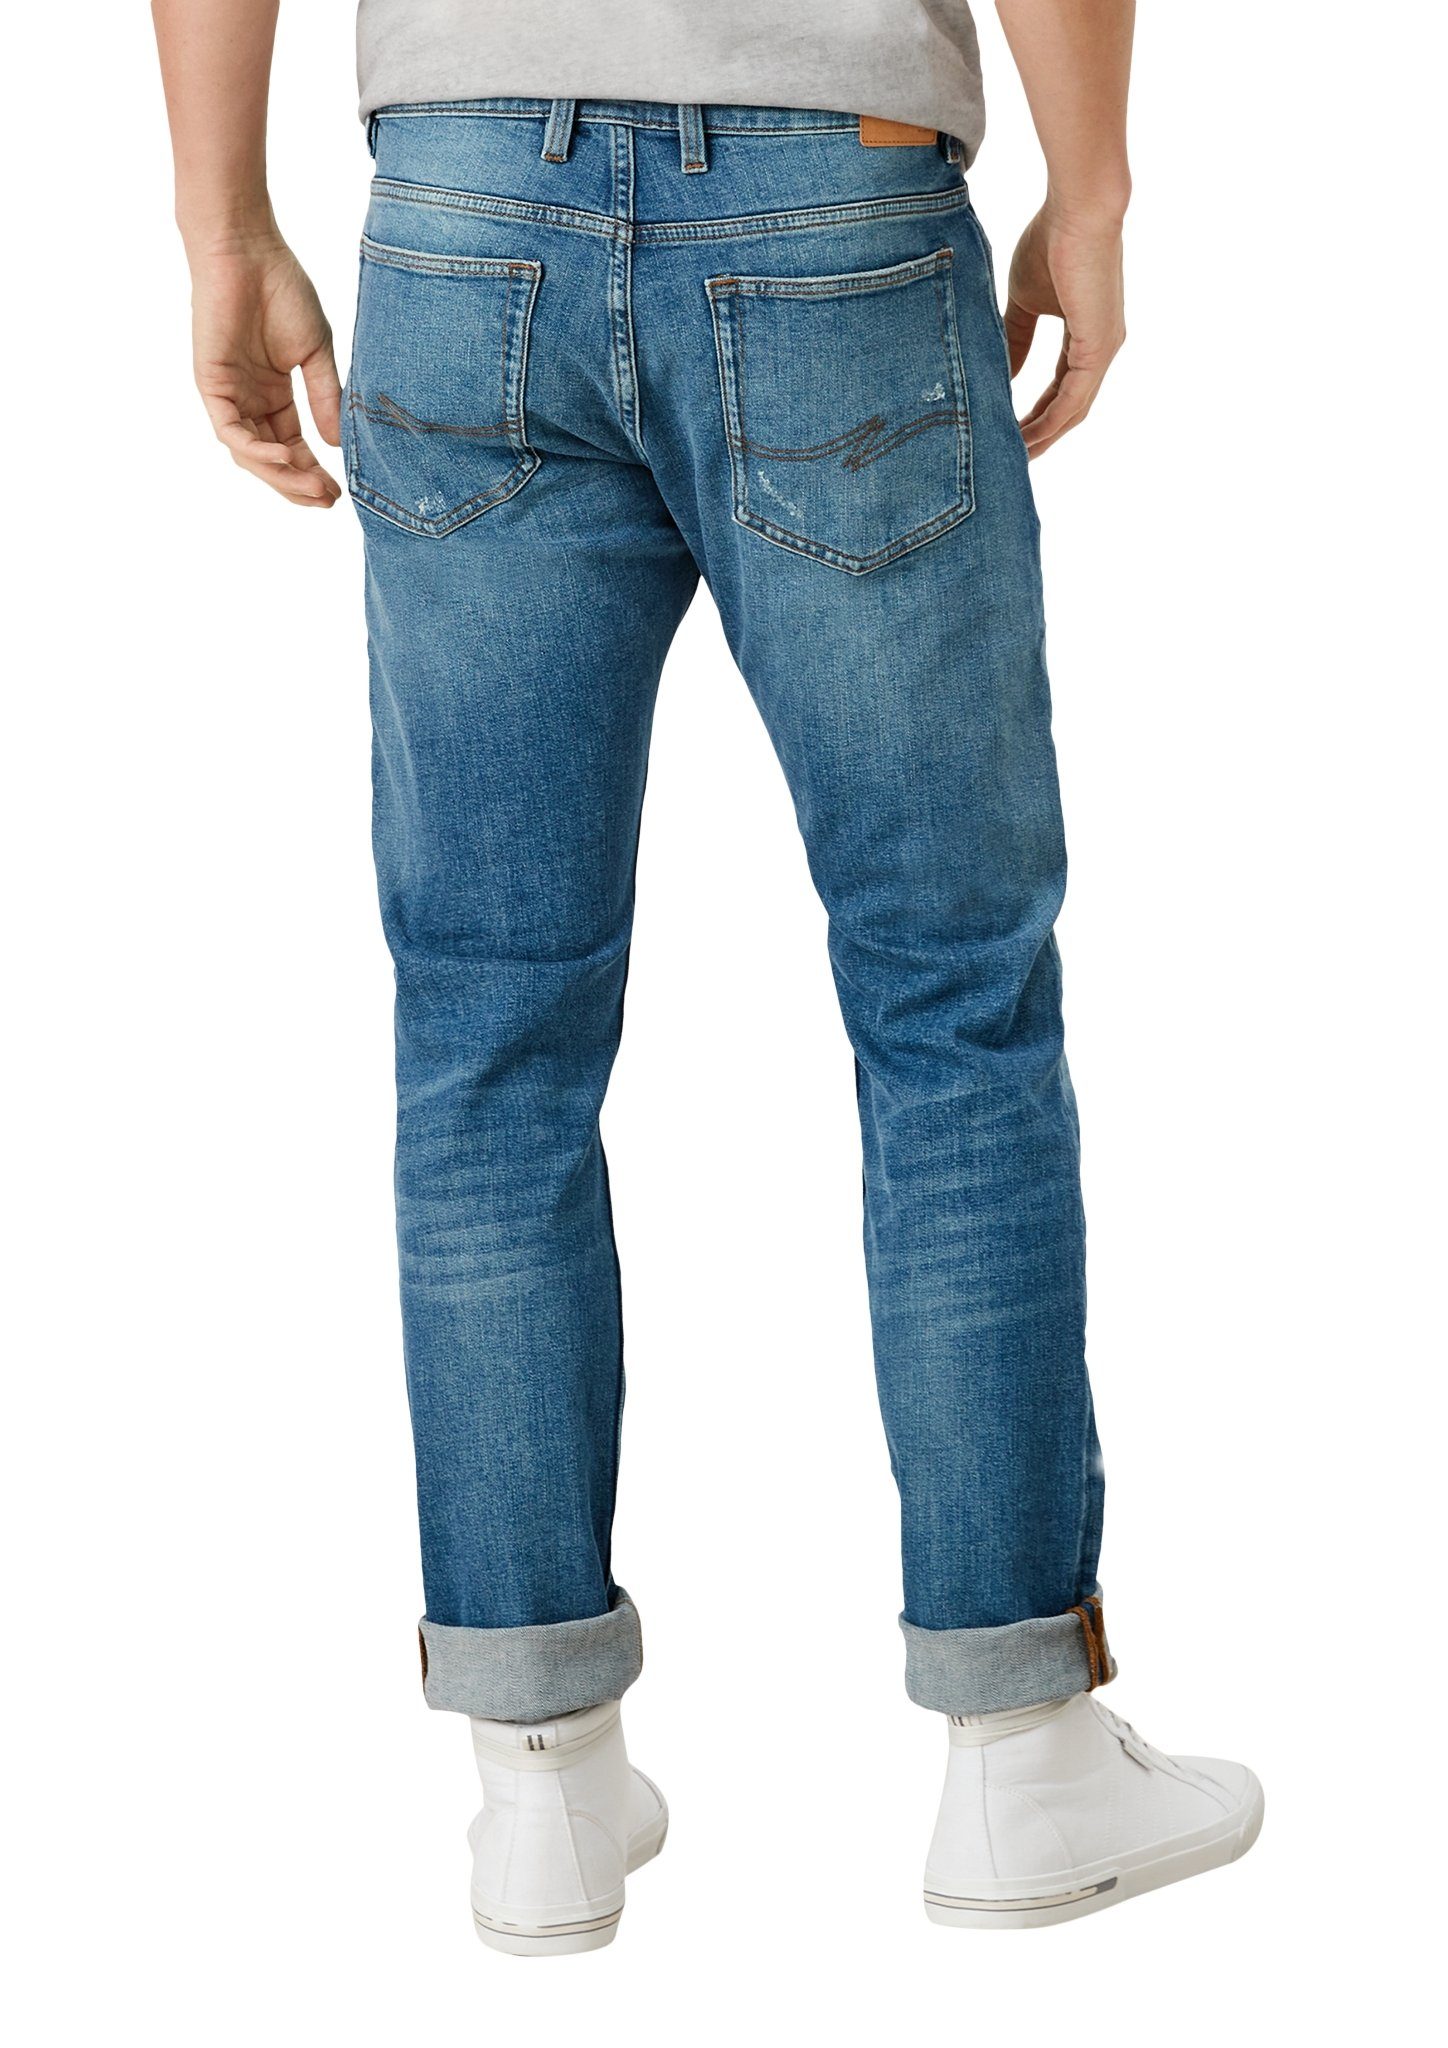 Herren Jeans Q/S by s.Oliver 5-Pocket-Jeans Slim: Jeans im Used-Look Waschung, Destroyes